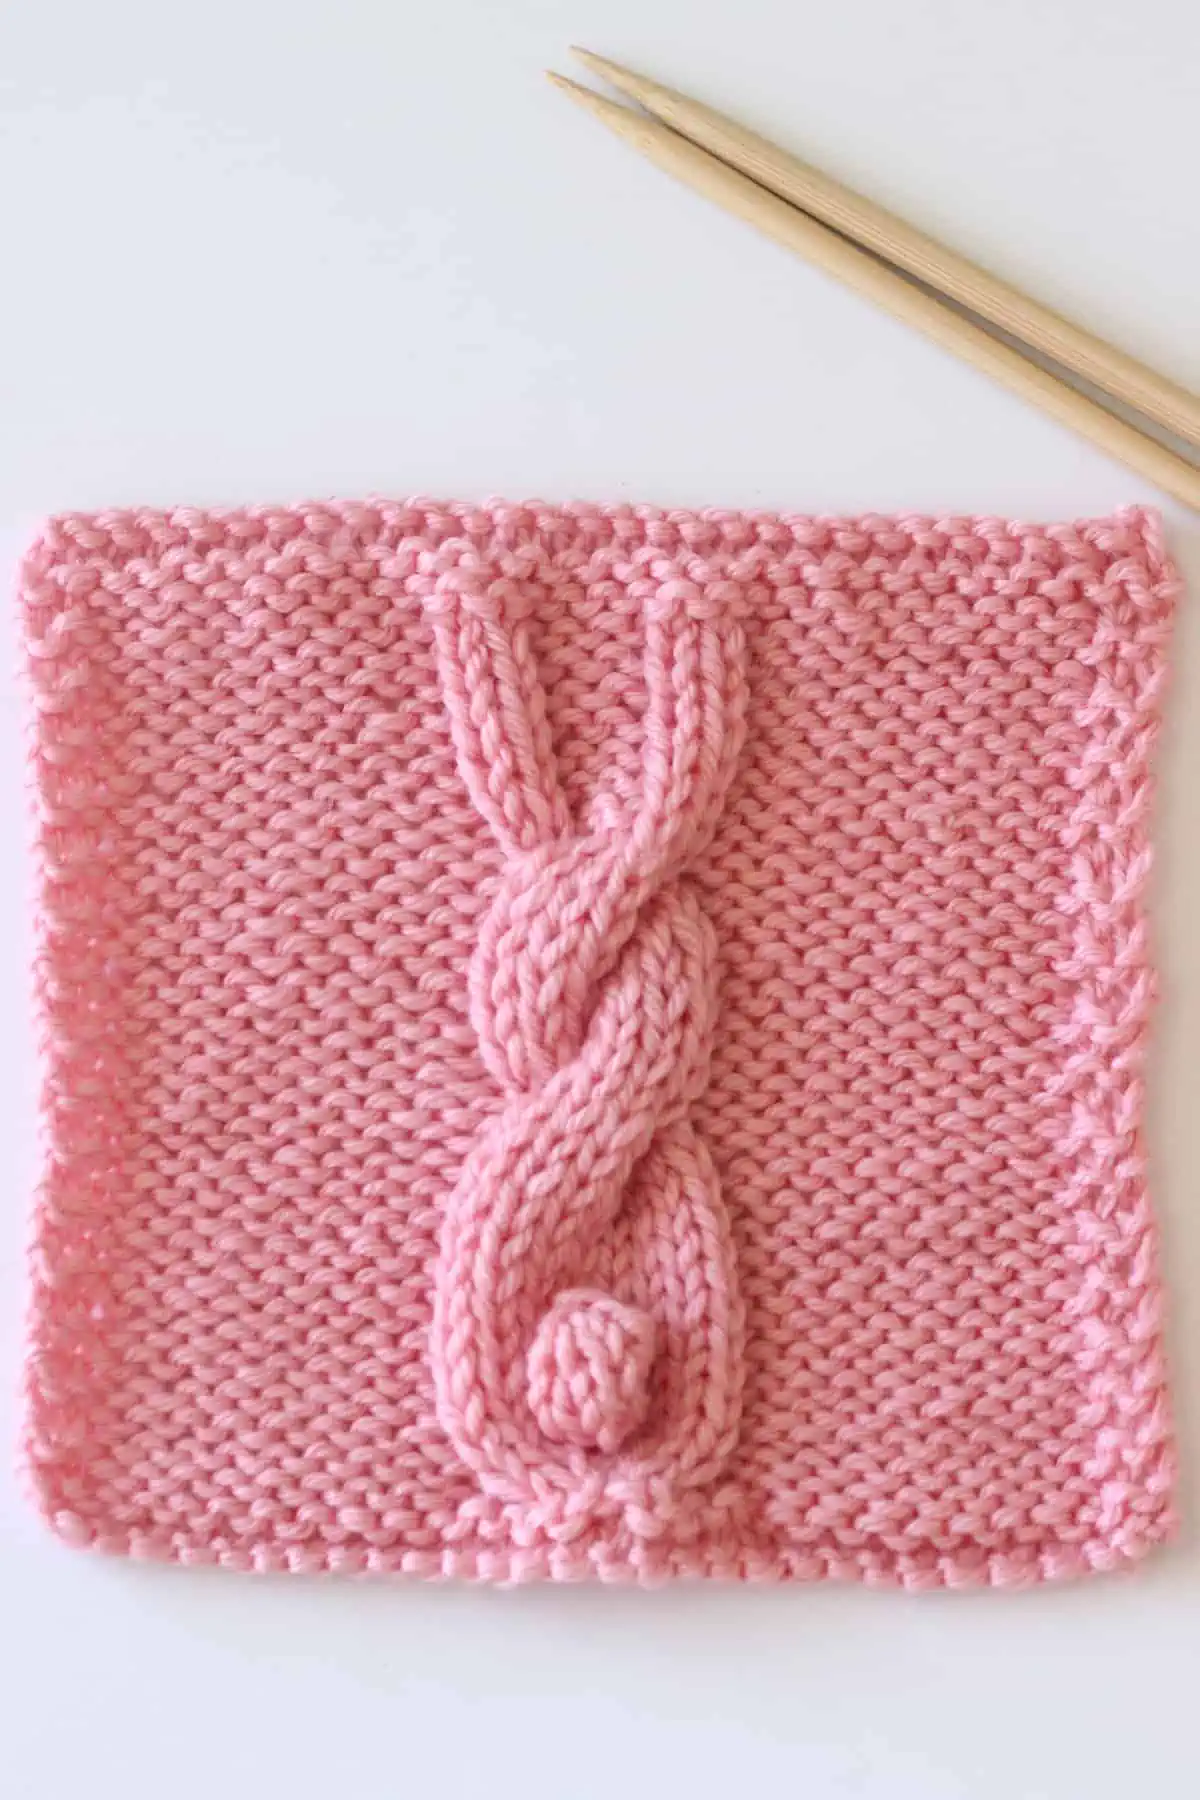 Bunny Cable knitting square in pink yarn color with straight knitting needles.